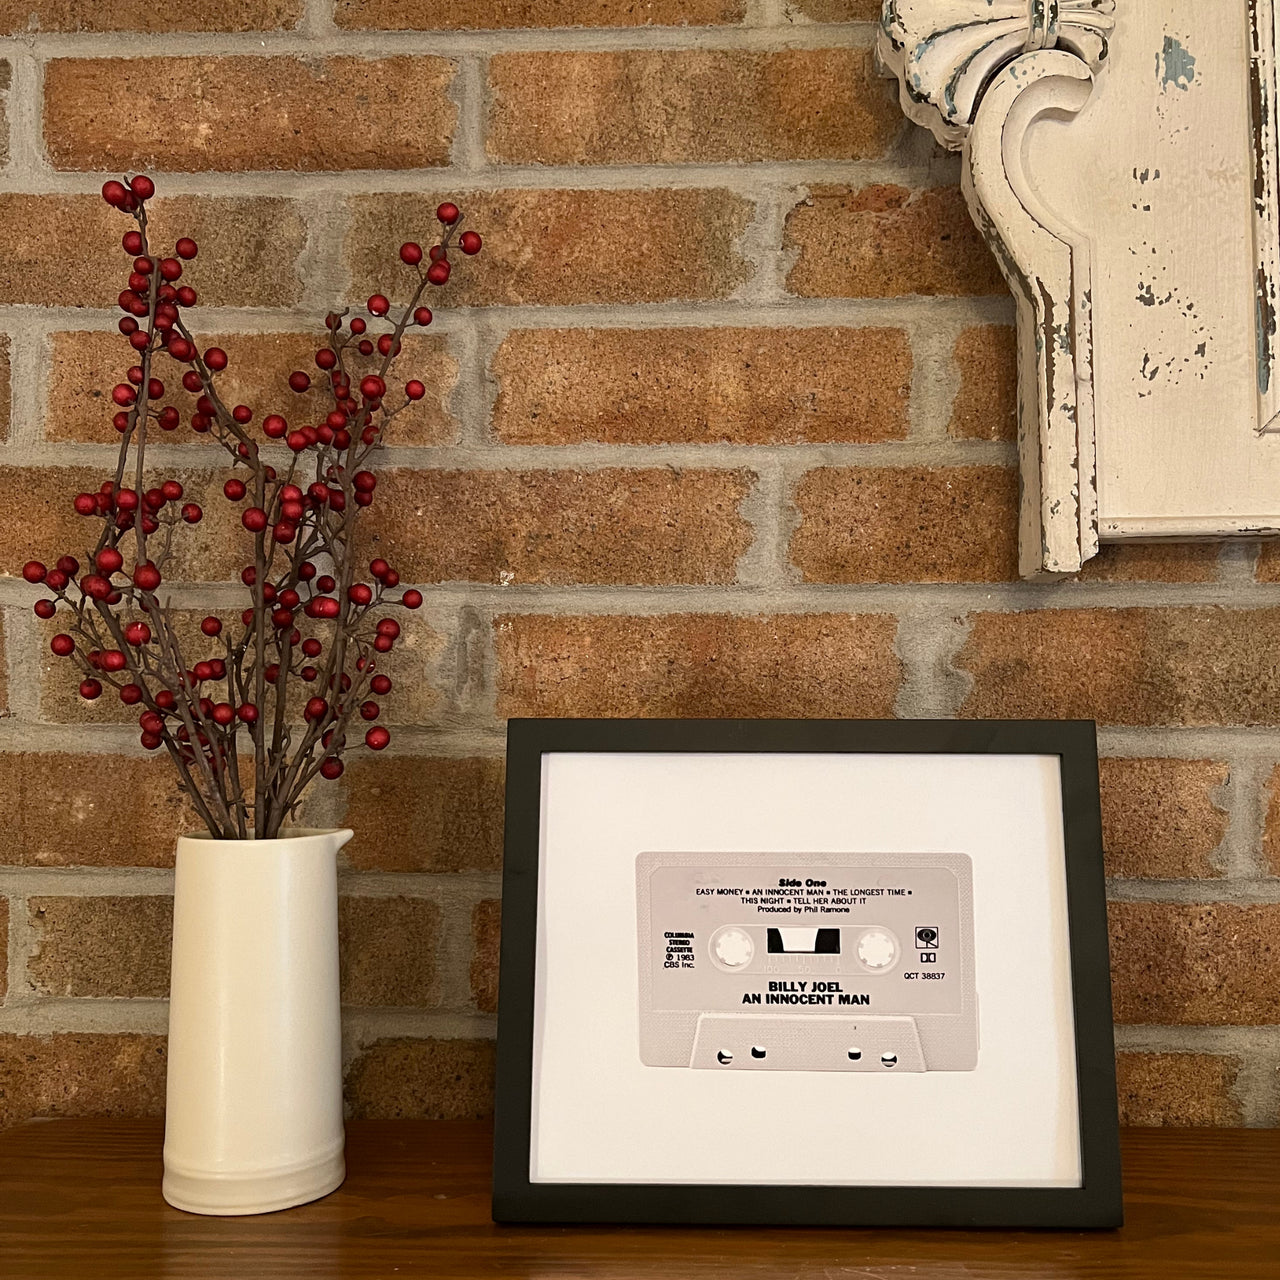 Modern art photo of the cassette of "Billy Joel An Innocent Man" displayed in your home